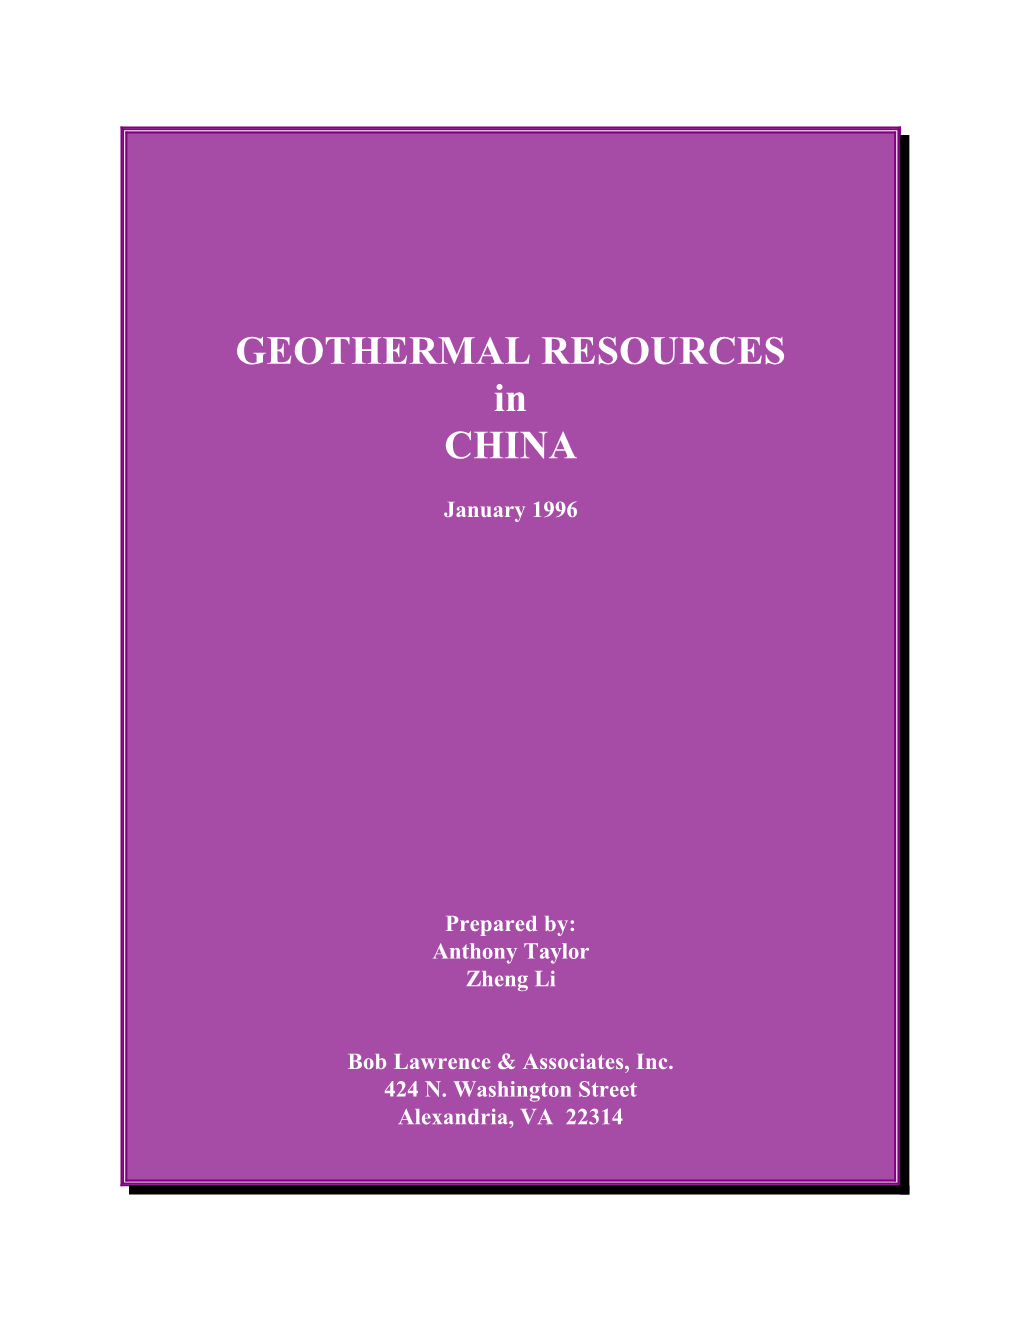 GEOTHERMAL RESOURCES in CHINA